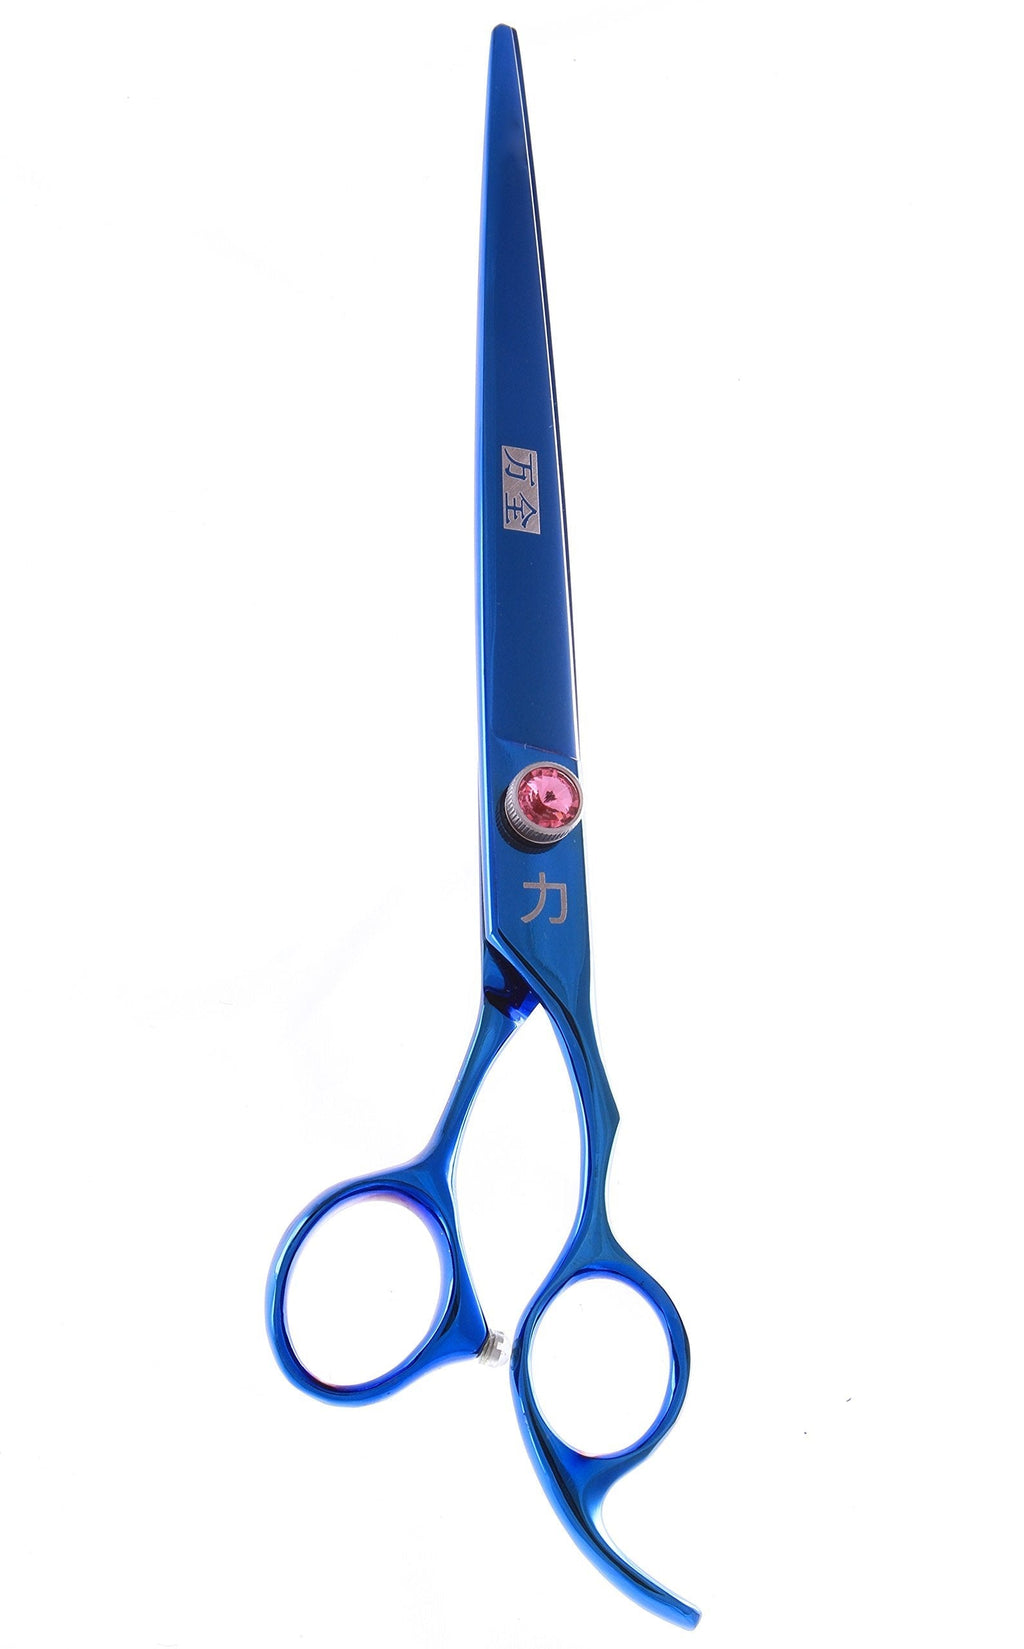 [Australia] - ShearsDirect Japanese 440C Blue Titanium Cutting Shears with Pink Gem Stone Tension and Anatomic Thumb, 8.0-Inch 